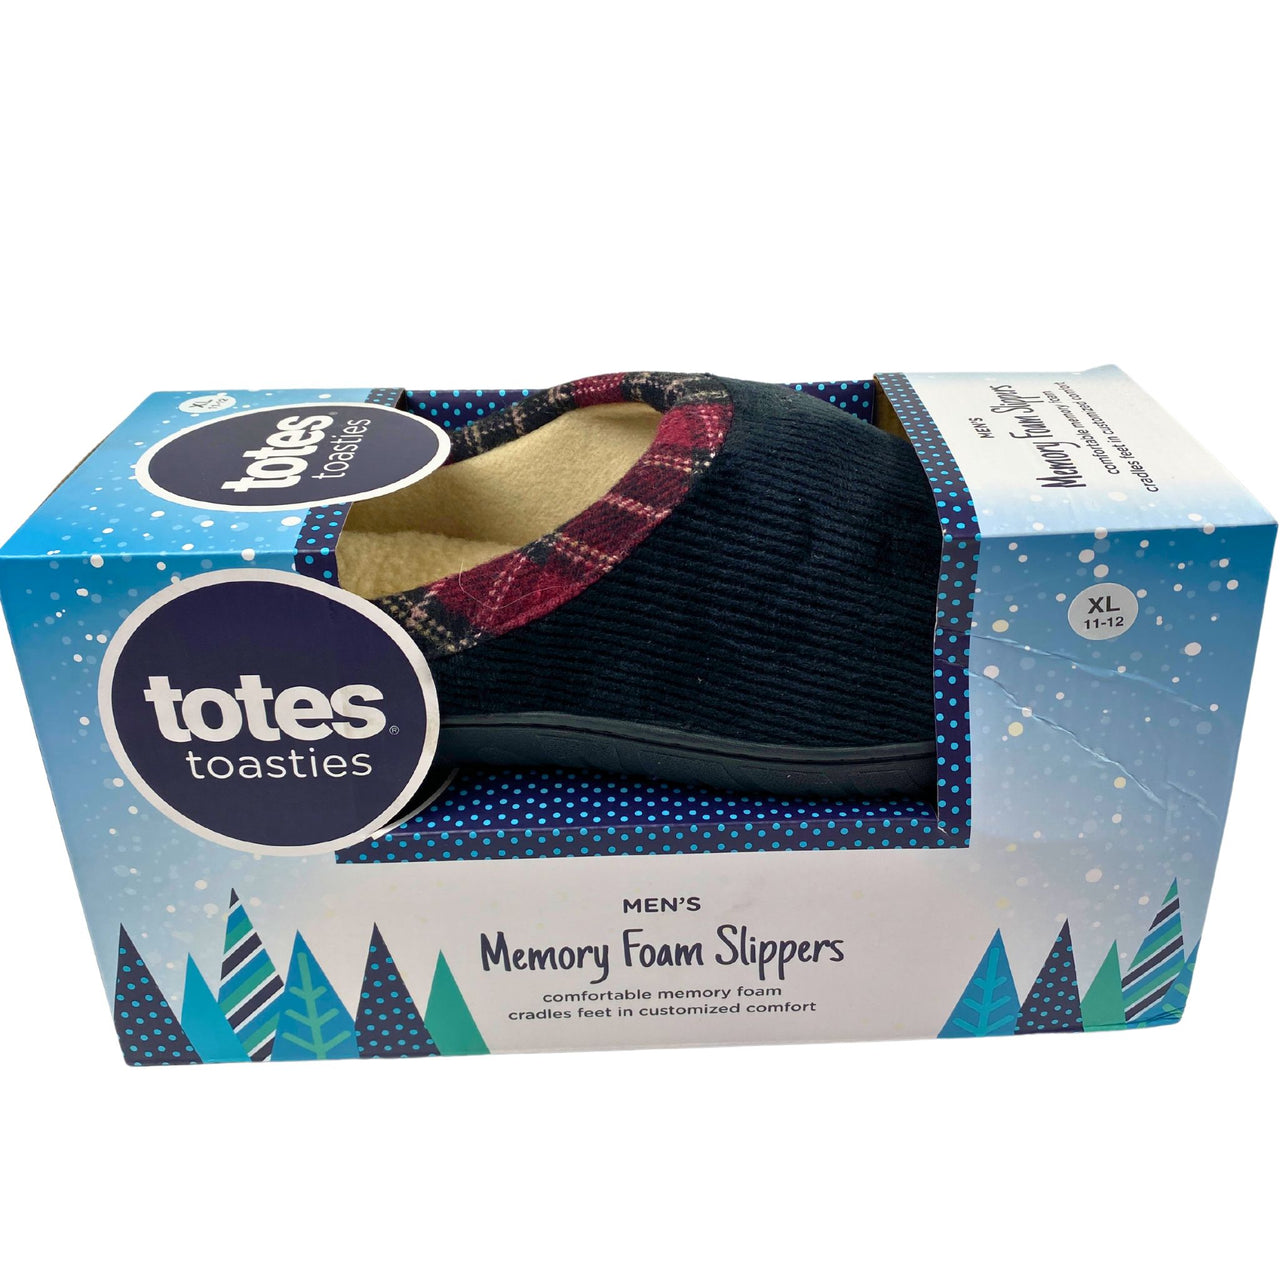 Totes Toasties Women's and Men's, Memory Foam Slippers Sizes Mix 